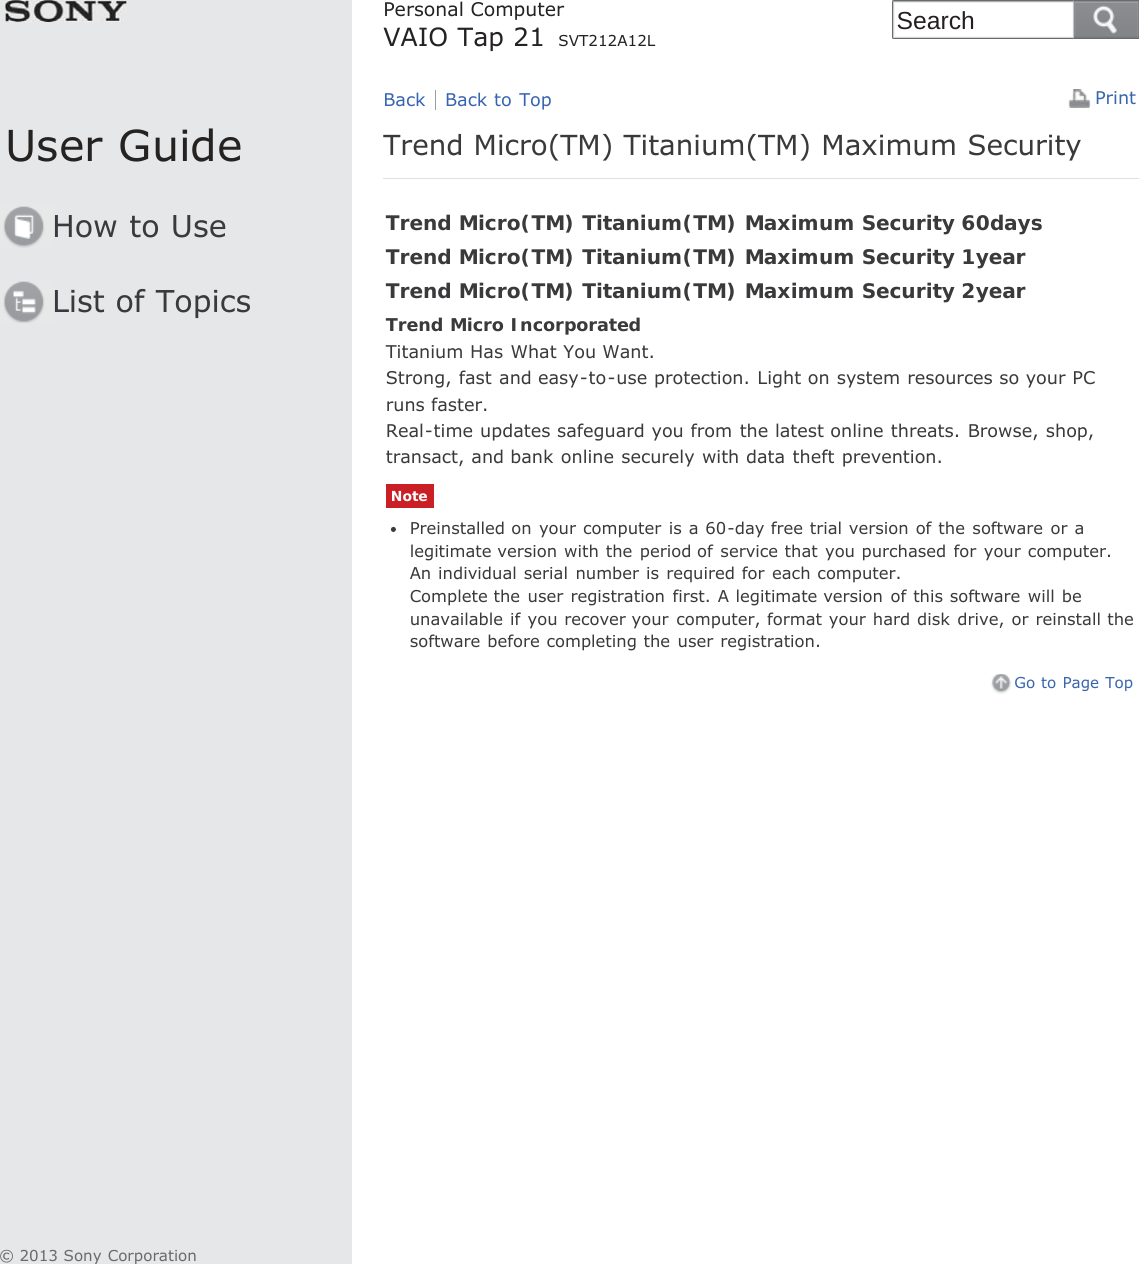 User GuideHow to UseList of TopicsPrintPersonal ComputerVAIO Tap 21 SVT212A12LTrend Micro(TM) Titanium(TM) Maximum SecurityTrend Micro(TM) Titanium(TM) Maximum Security 60daysTrend Micro(TM) Titanium(TM) Maximum Security 1yearTrend Micro(TM) Titanium(TM) Maximum Security 2yearTrend Micro IncorporatedTitanium Has What You Want.Strong, fast and easy-to-use protection. Light on system resources so your PCruns faster.Real-time updates safeguard you from the latest online threats. Browse, shop,transact, and bank online securely with data theft prevention.NotePreinstalled on your computer is a 60-day free trial version of the software or alegitimate version with the period of service that you purchased for your computer.An individual serial number is required for each computer.Complete the user registration first. A legitimate version of this software will beunavailable if you recover your computer, format your hard disk drive, or reinstall thesoftware before completing the user registration.Go to Page TopBack Back to Top© 2013 Sony CorporationSearch